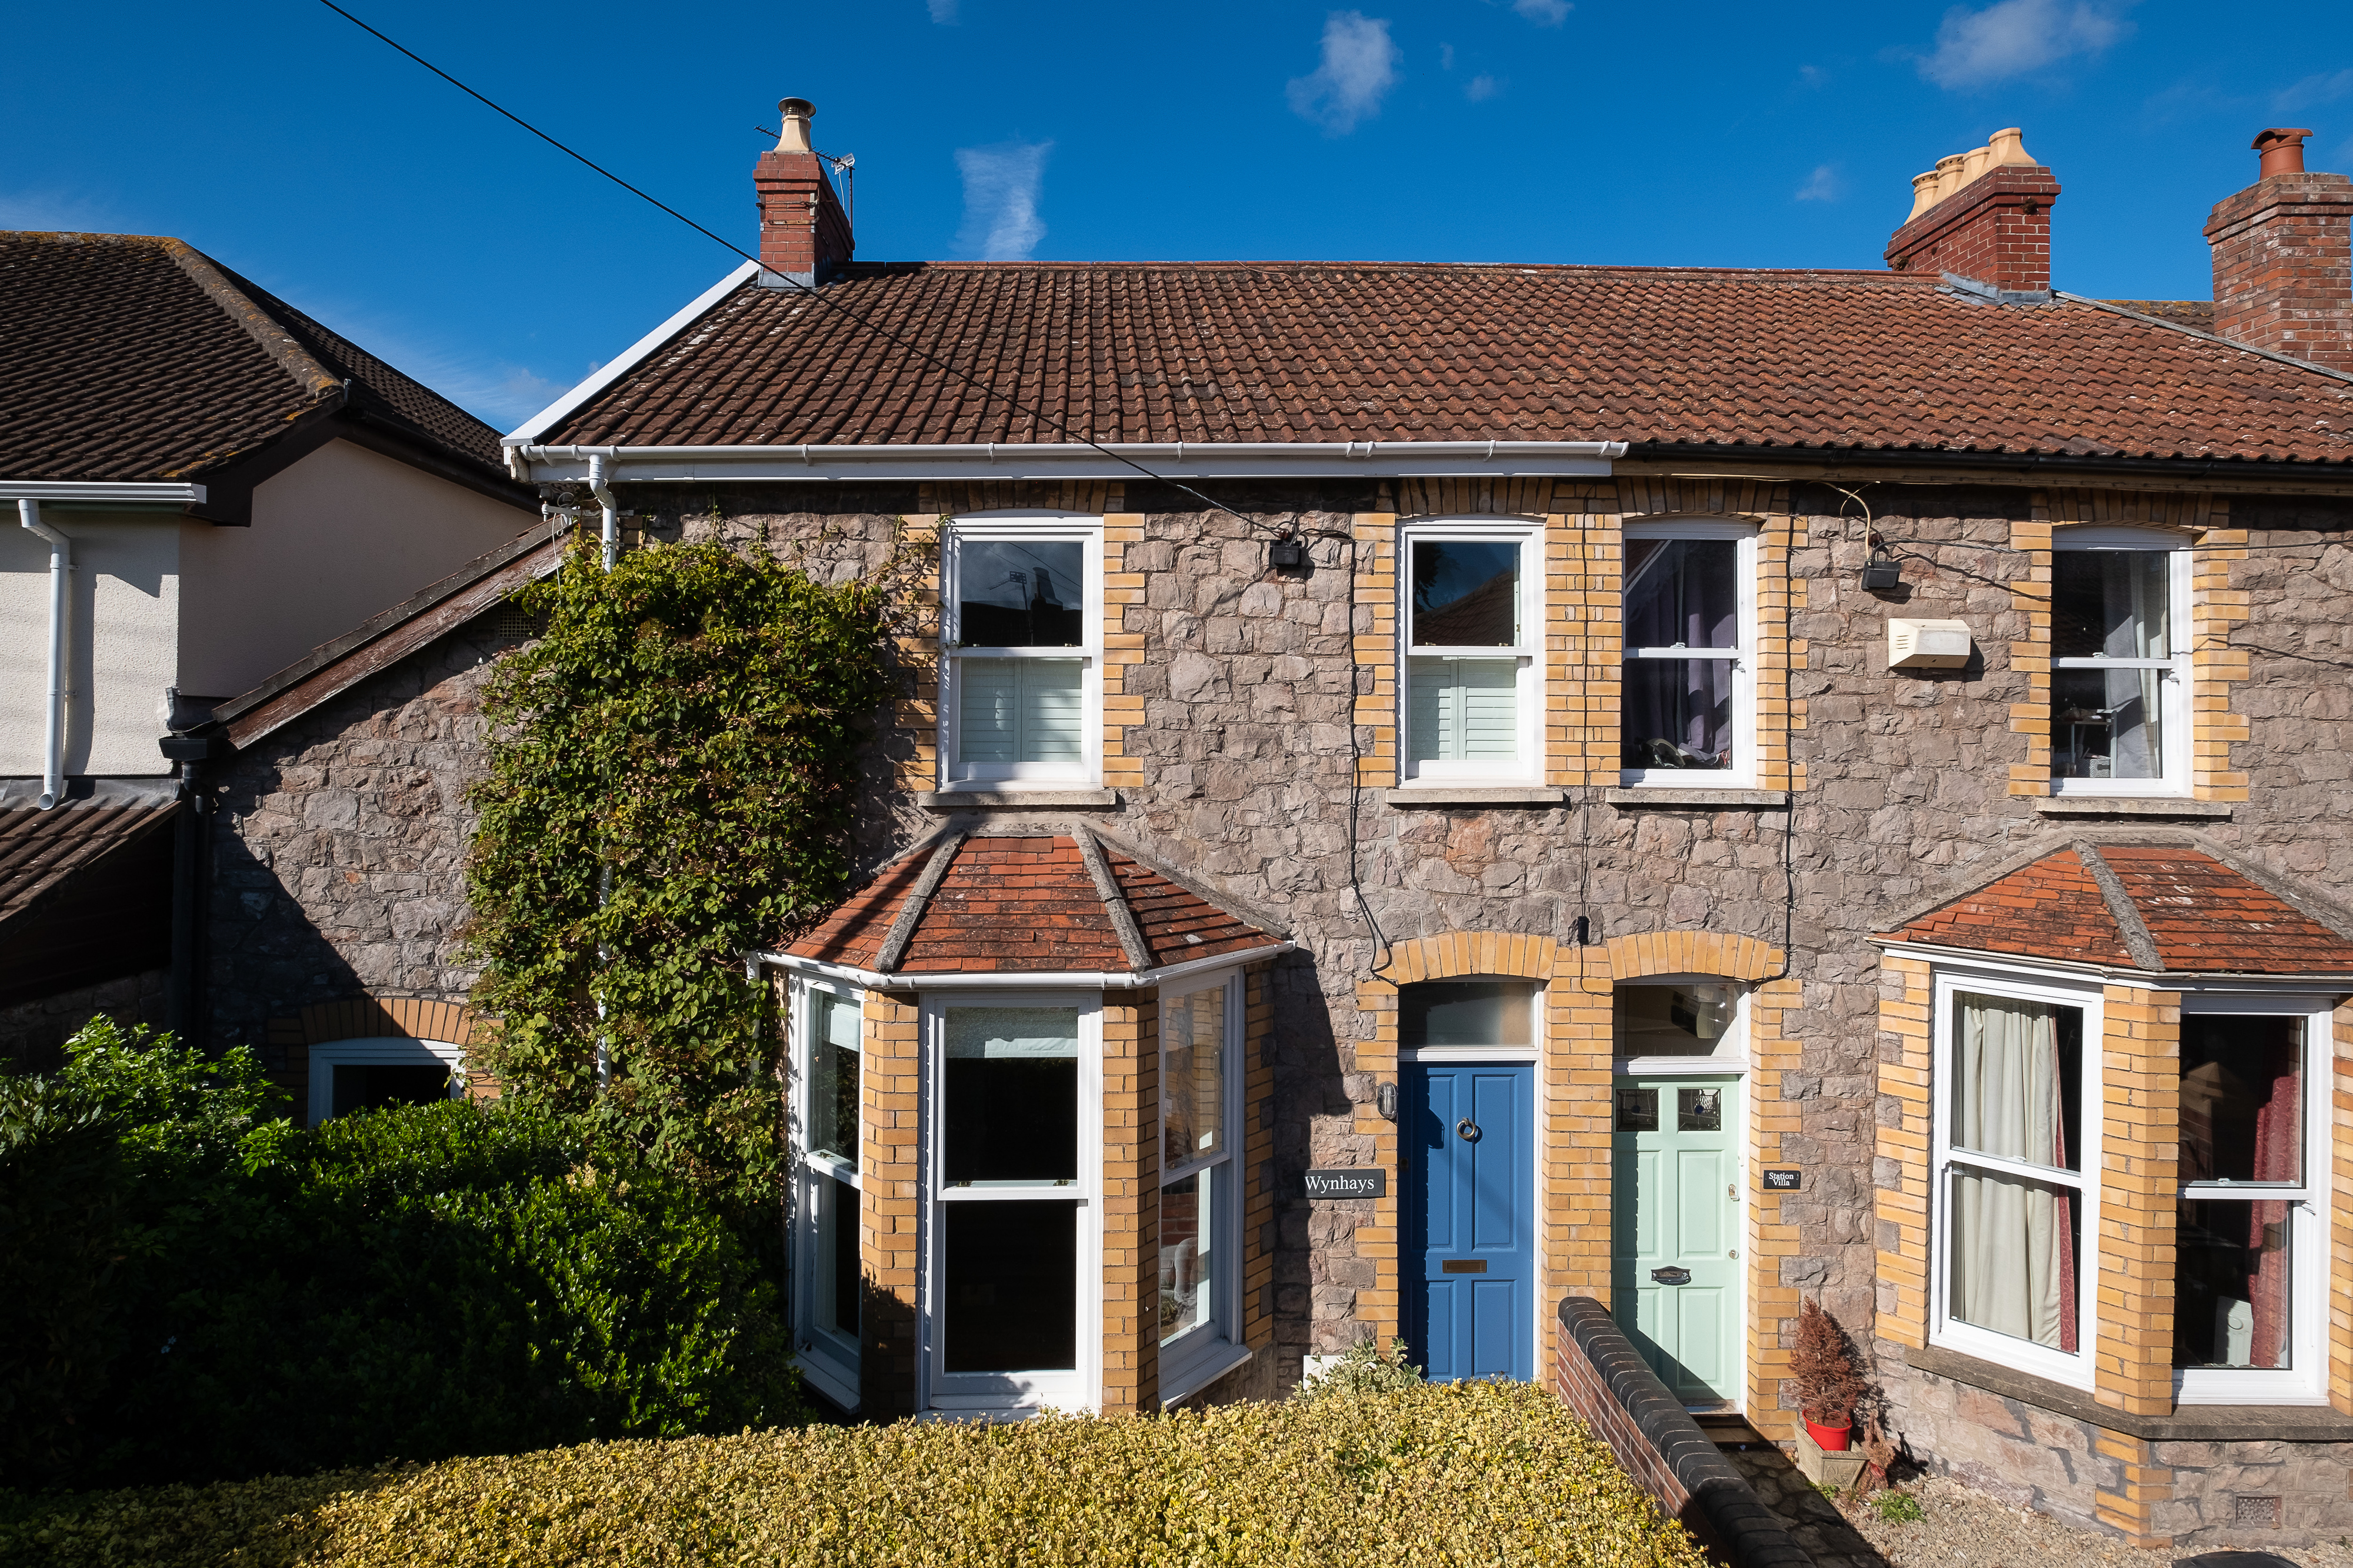 Station Road, Wrington - beautifully presented 4 bedroom home